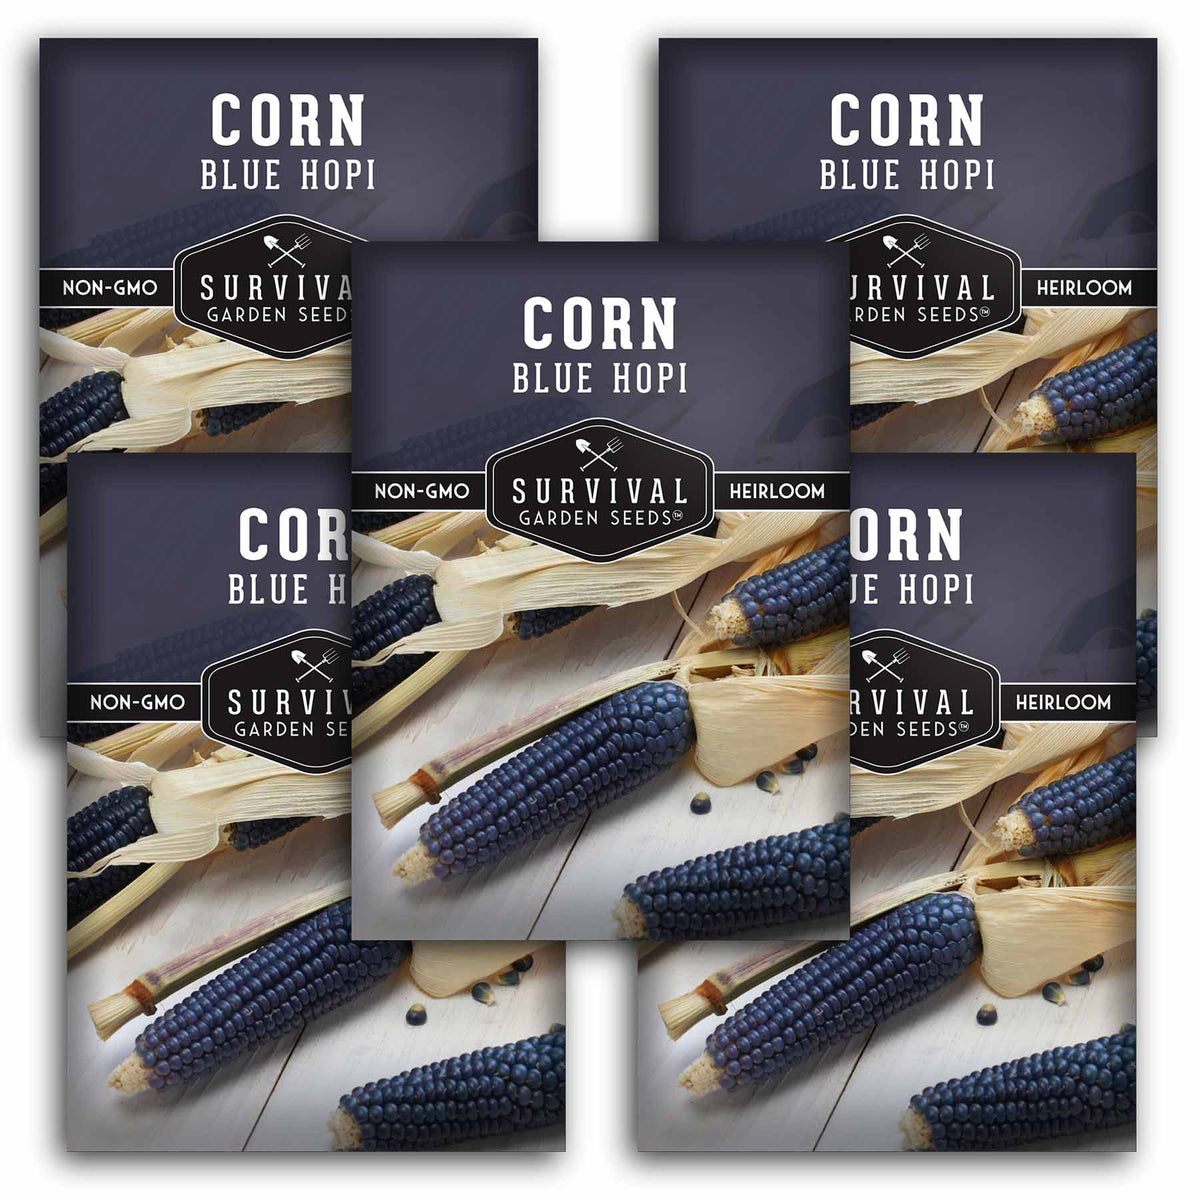 5 packets of Blue Hope Corn seeds